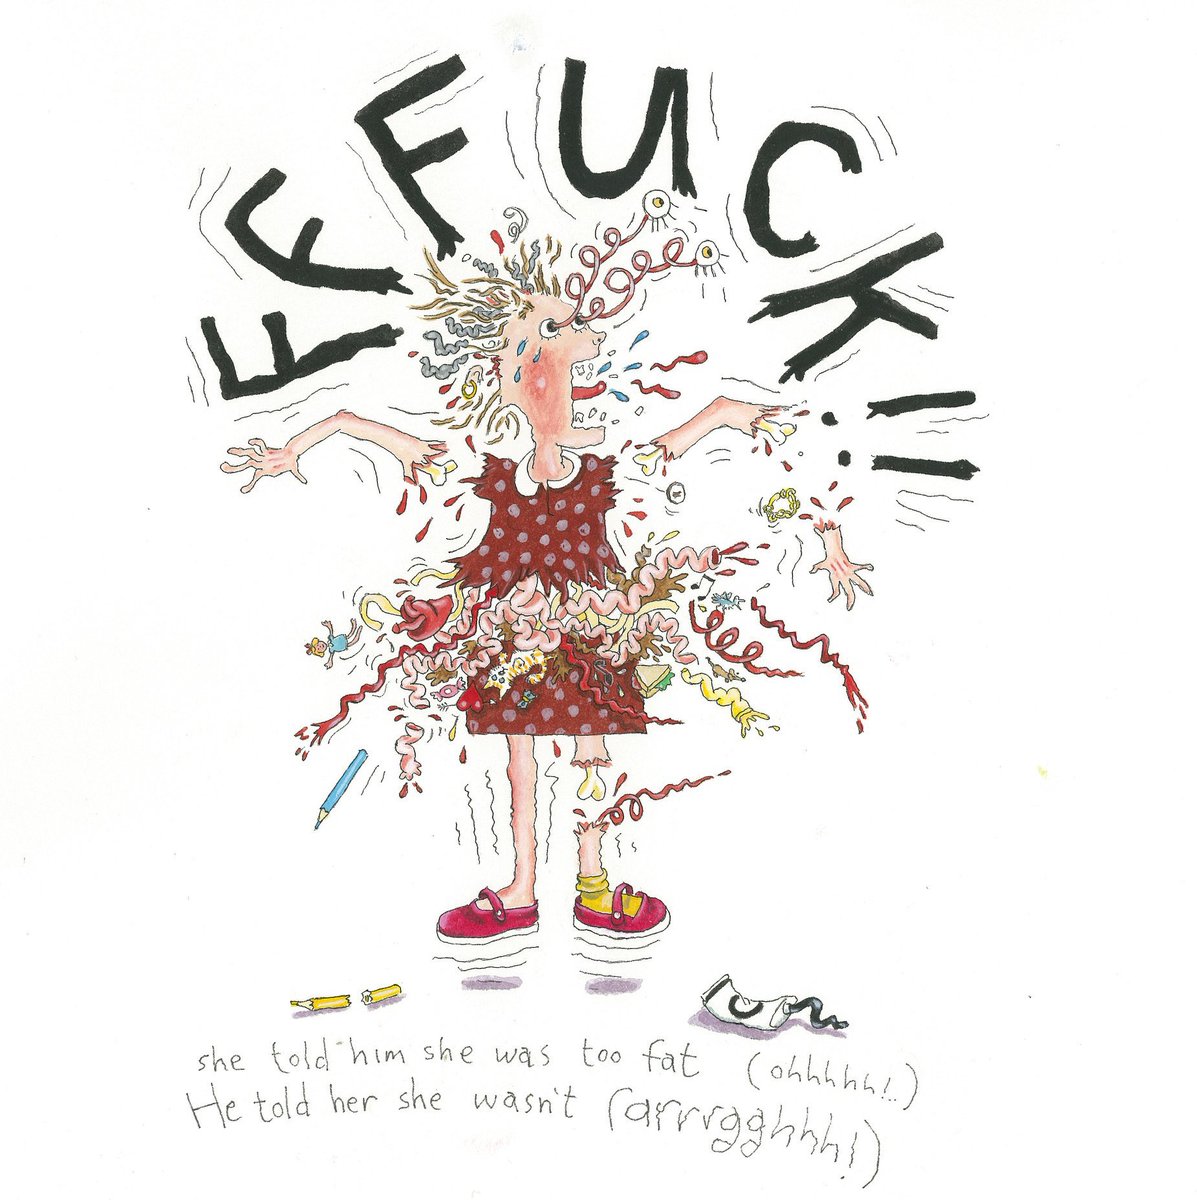 I dare say Fairfax will not be publishing anything about Mary Leunig’s latest, powerful set of cartoons 1/2